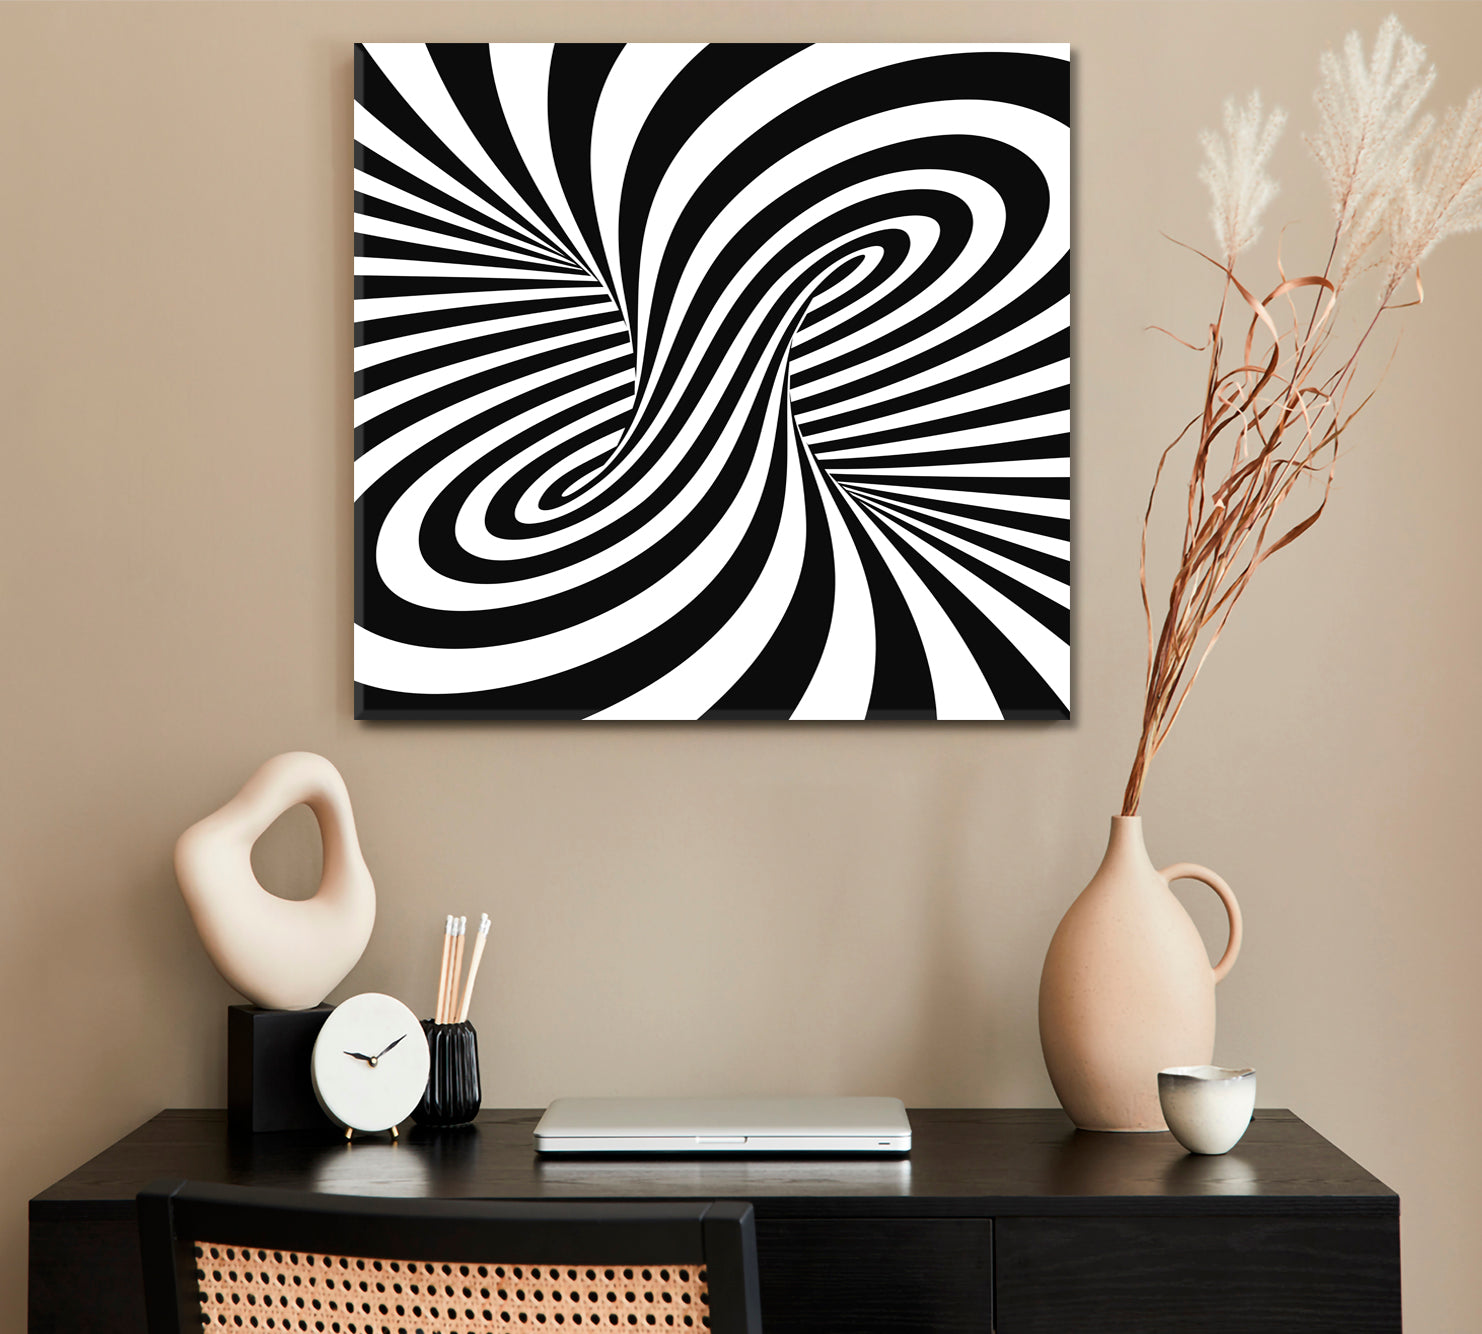 Black And White Spiral Optical Illusion Black and White Wall Art Print Artesty 1 Panel 12"x12" 